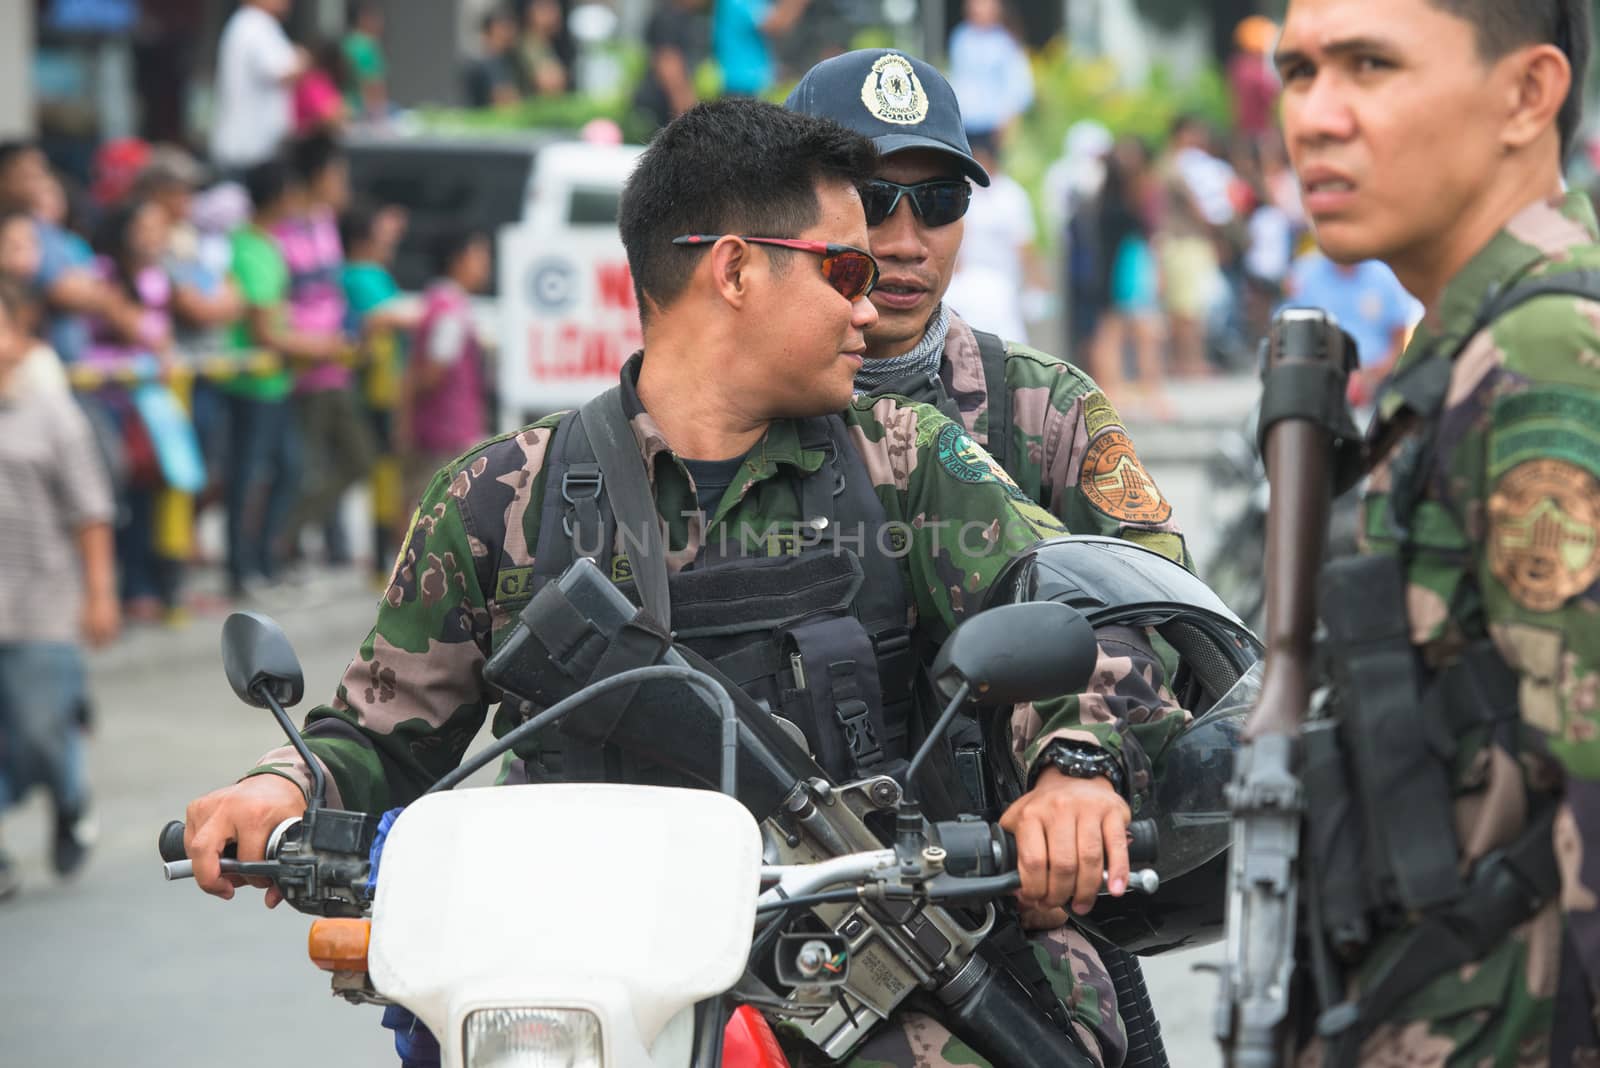 General Santos City, The Philippines - September 1, 2015: Armed police guarding the parade on the opening day of the 17th Annual Gensan Tuna Festival to celebrate the  most important industry of city, the tuna canneries.